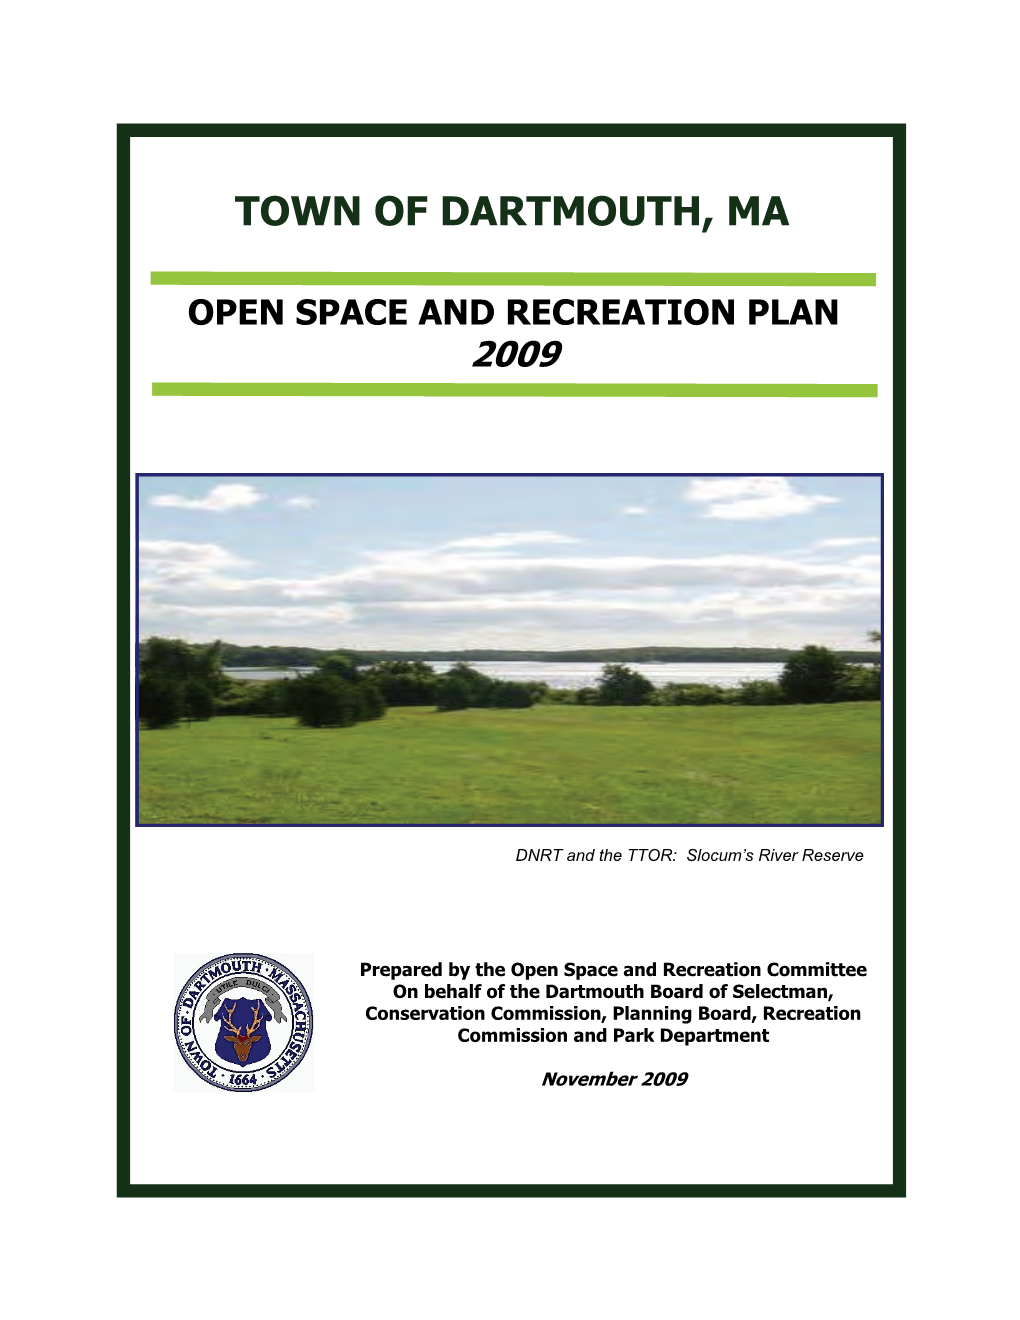 Open Space and Recreation Plan 2009